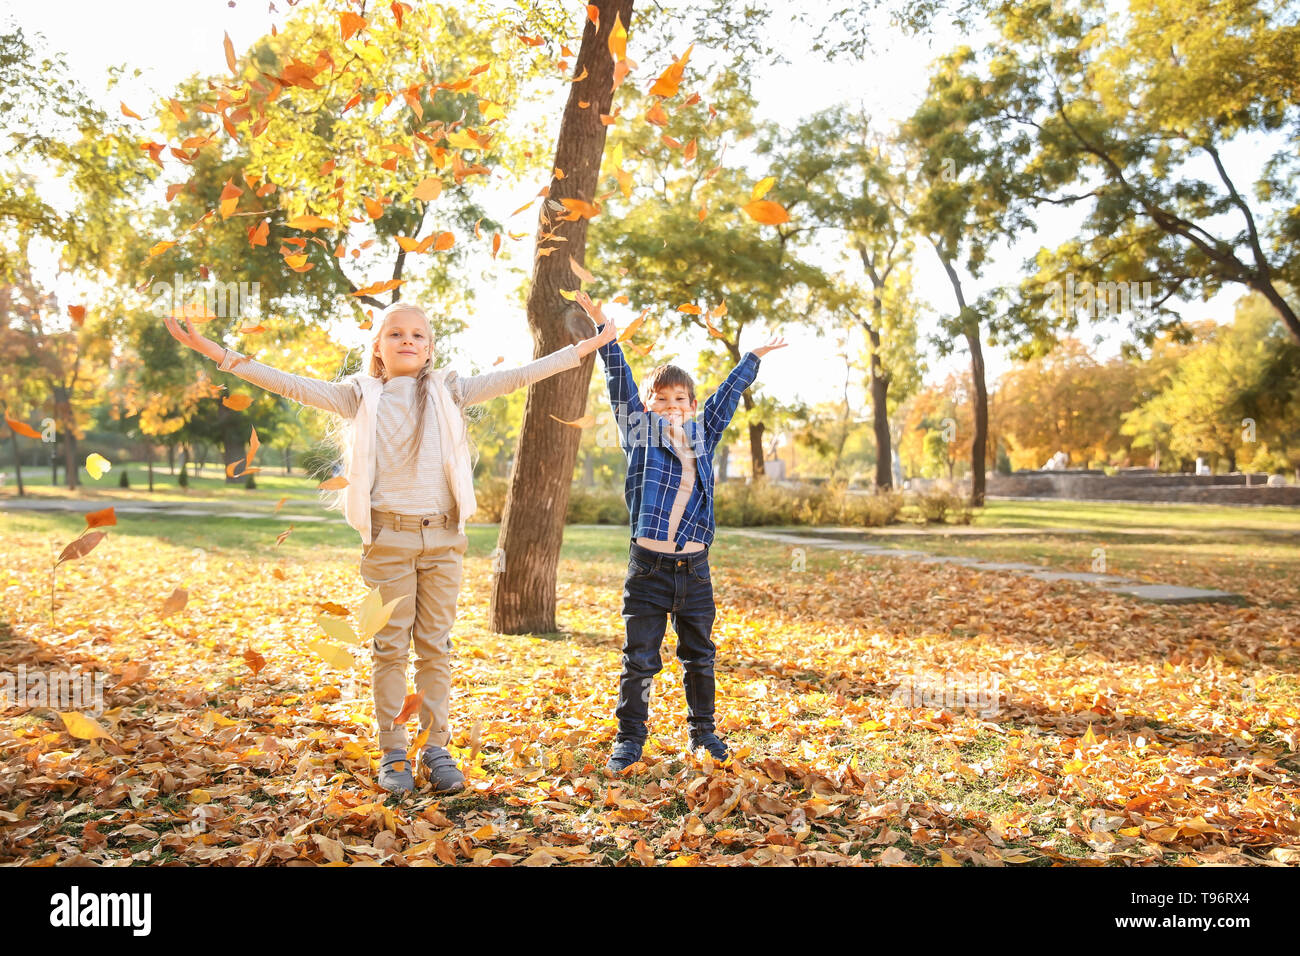 Children playing with leaves in autumn park Stock Photo